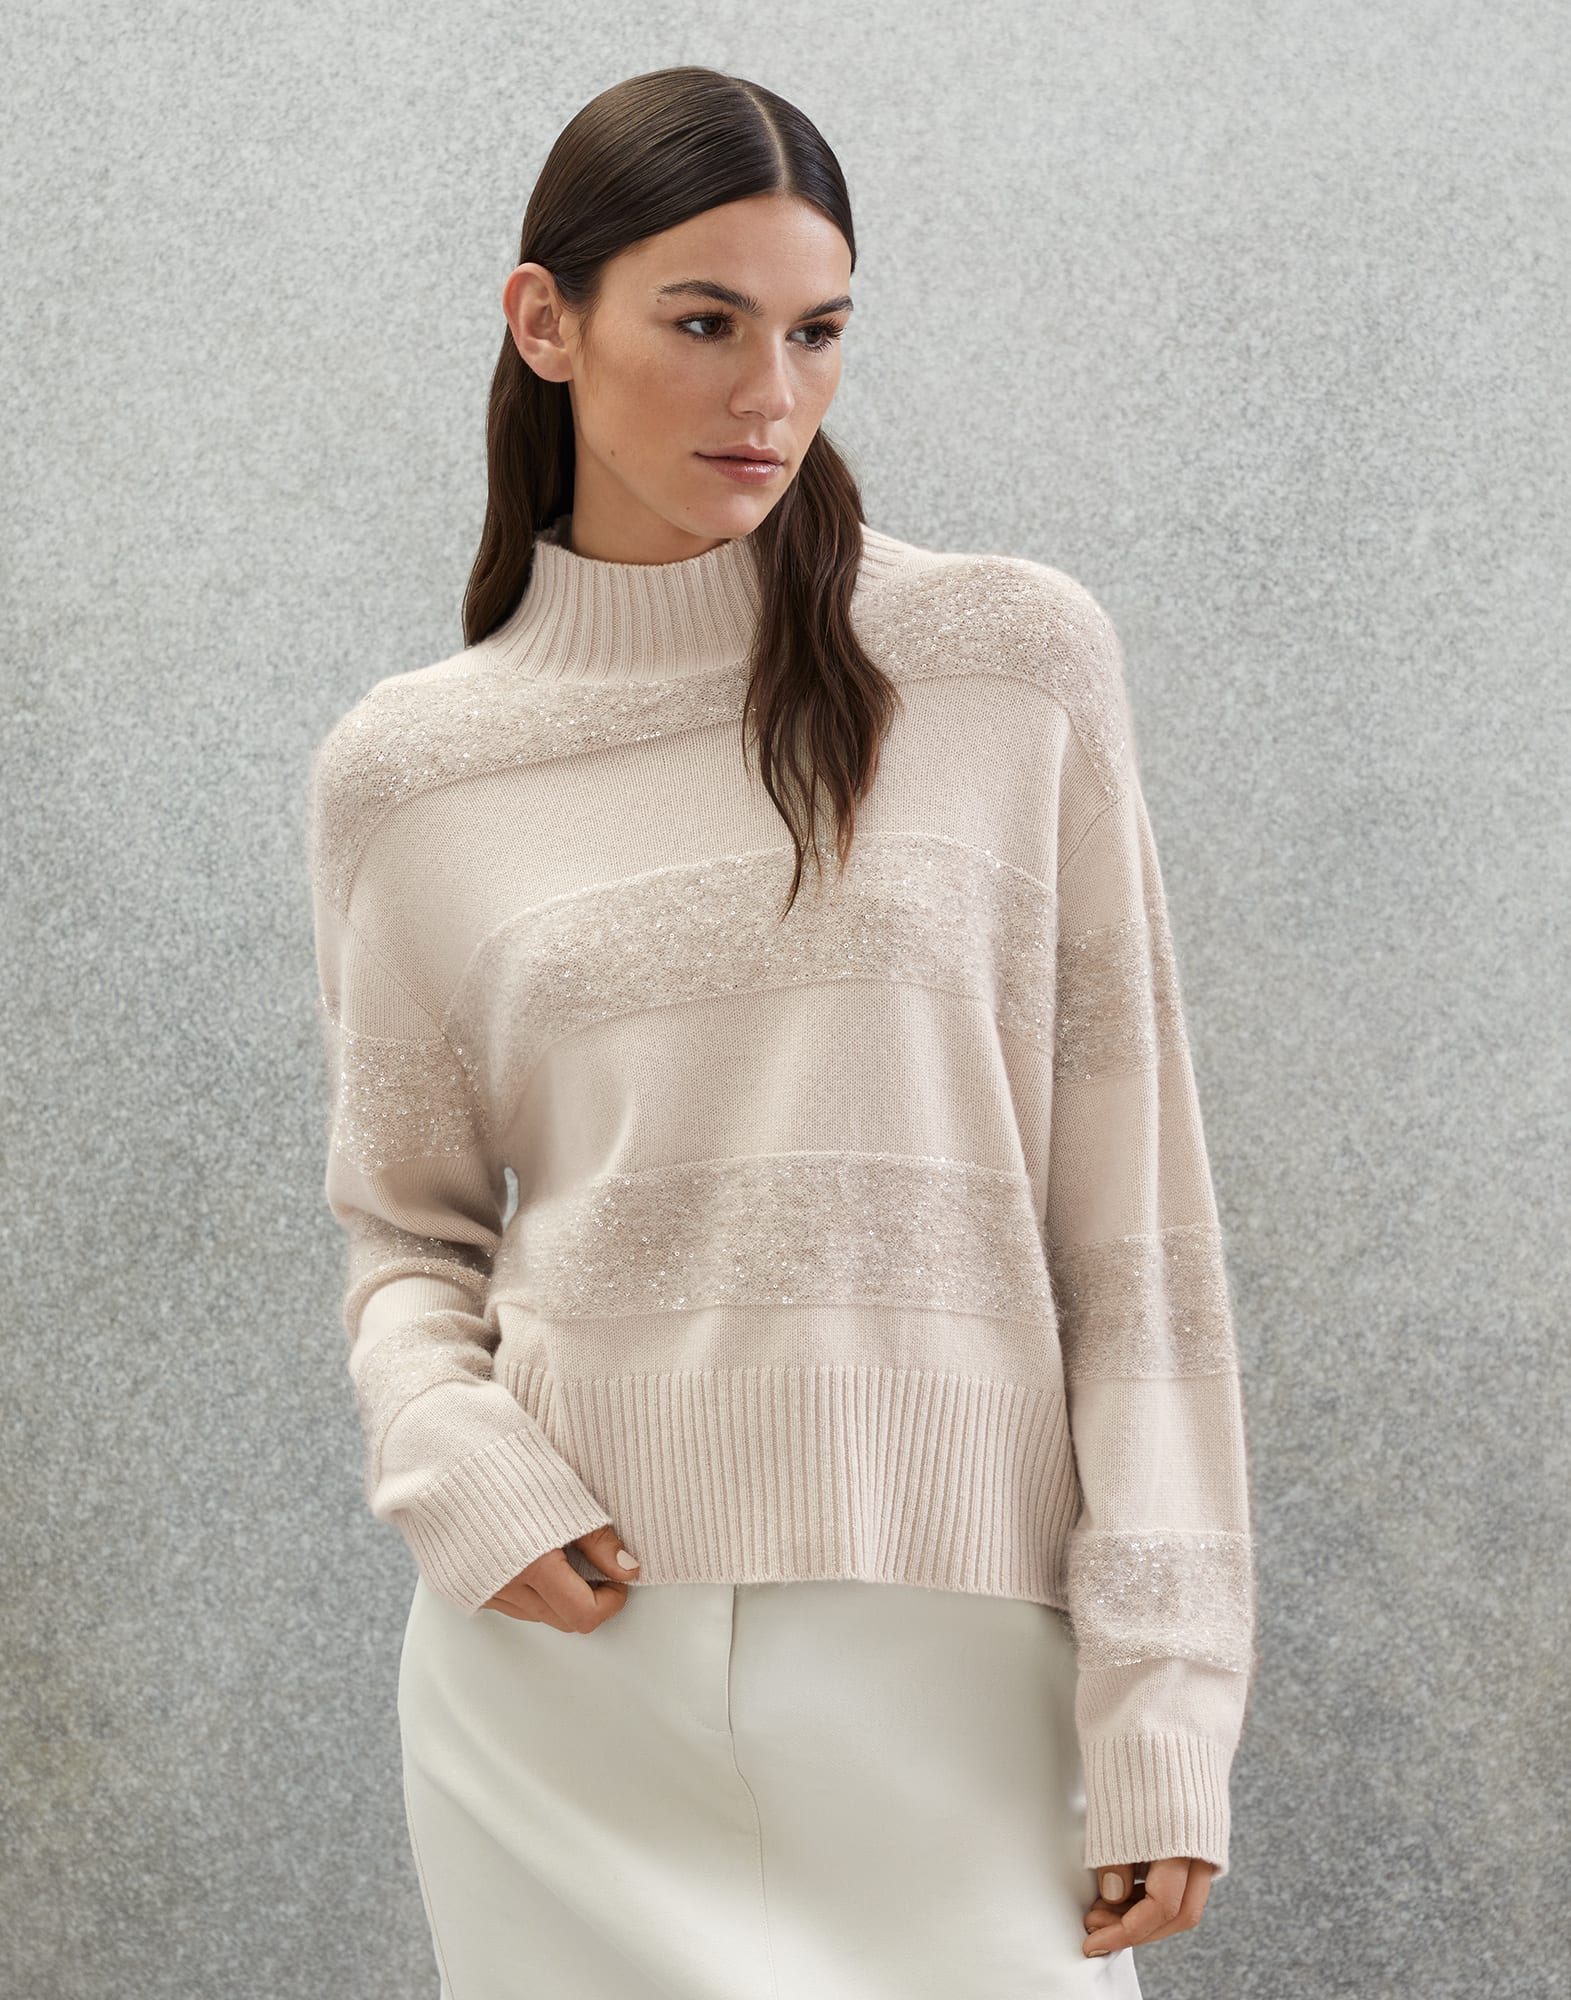 Wool, cashmere and silk sweater